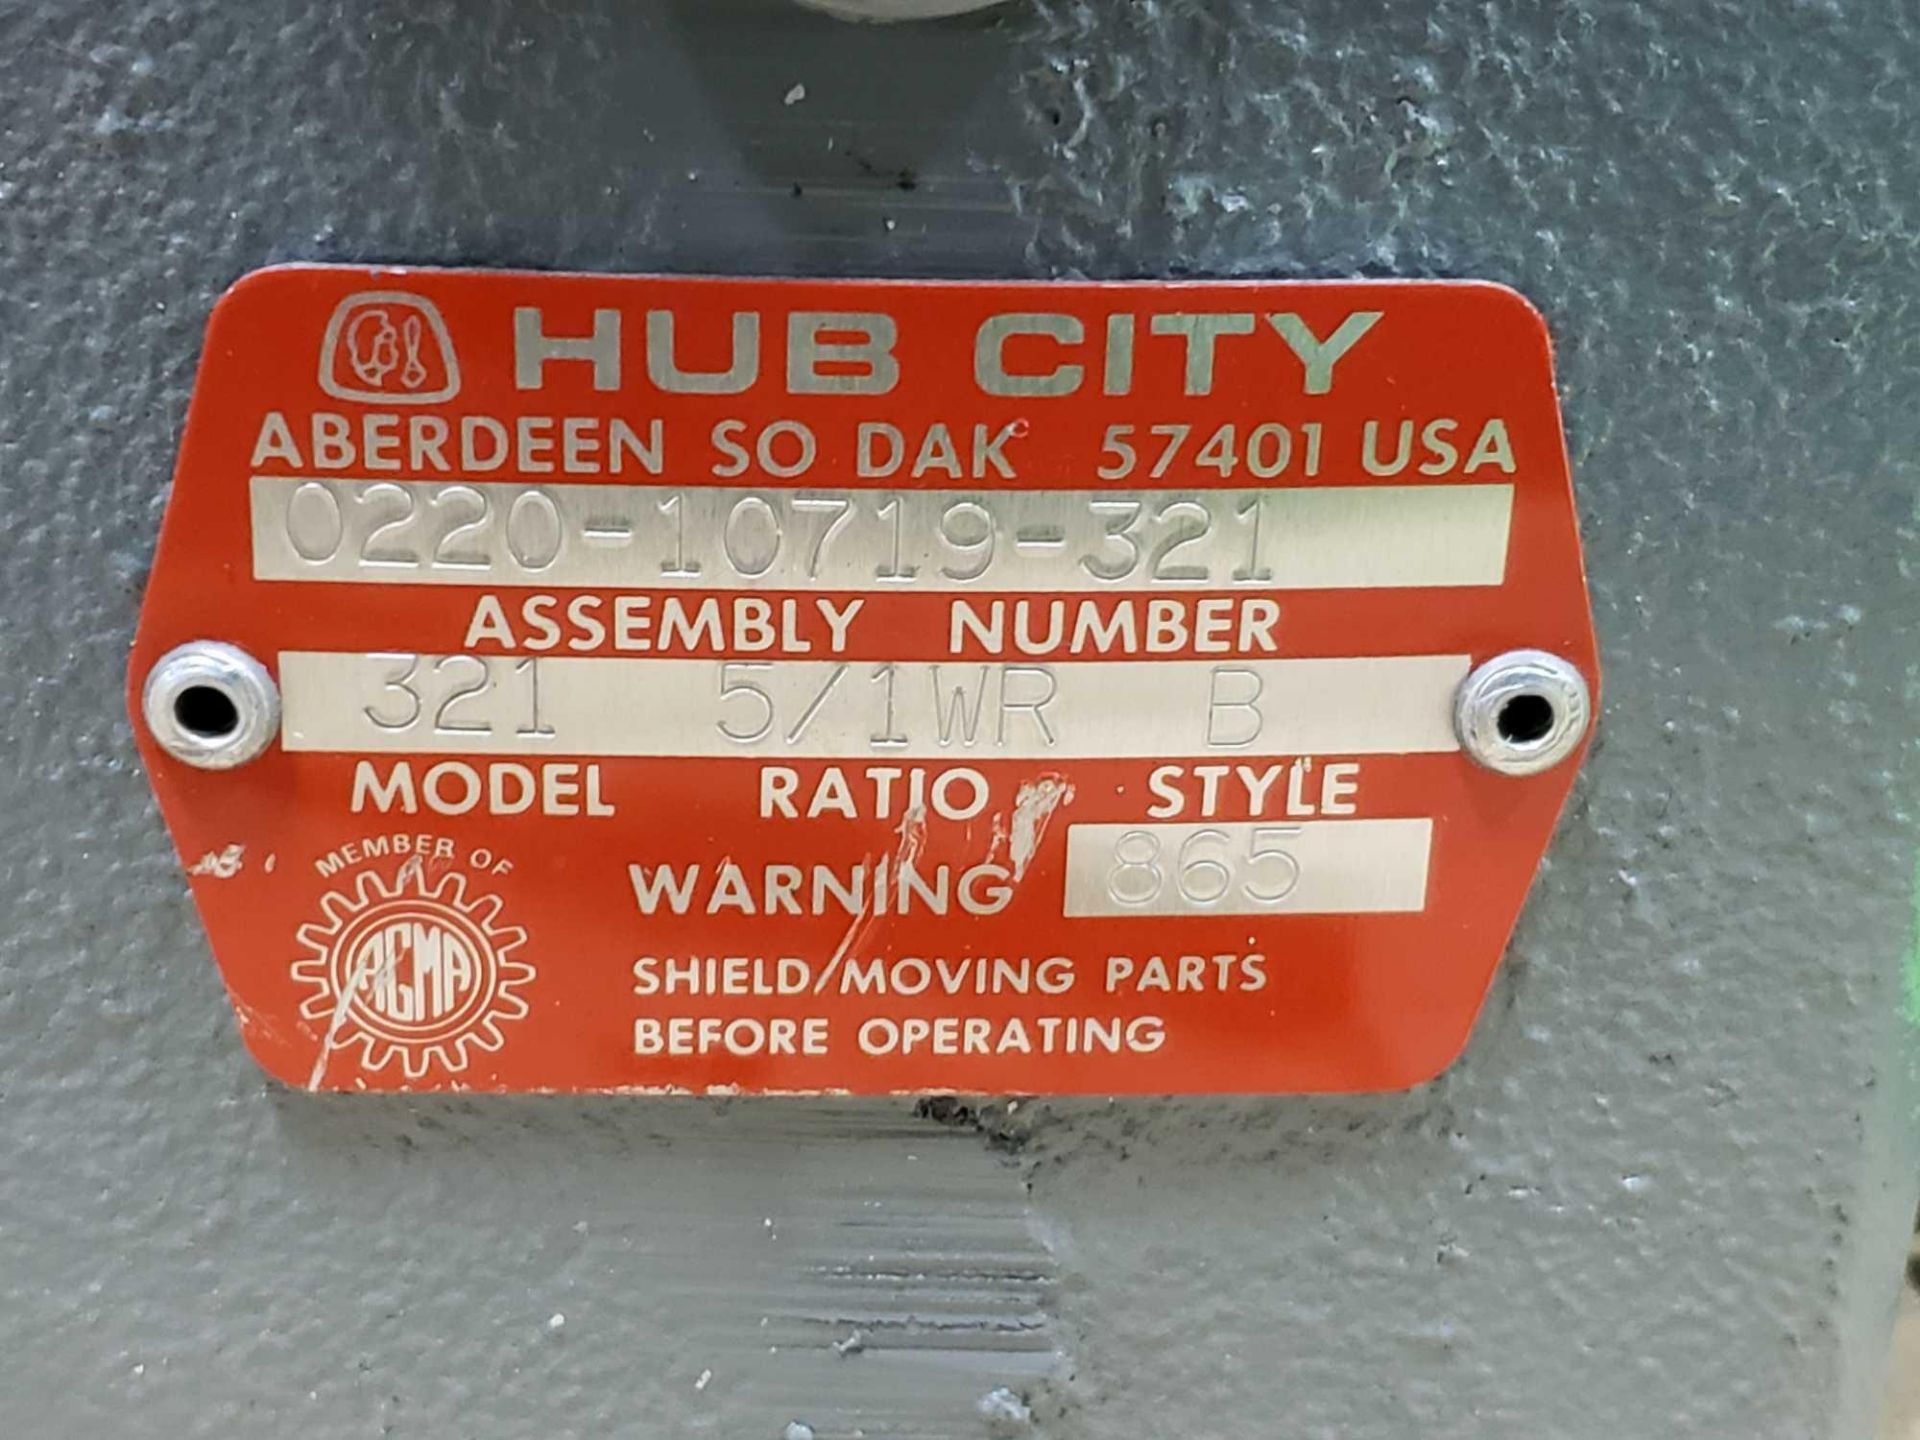 Hub City gear box speed reducer model 321, ratio 5/1WR, style B. New in box. - Image 2 of 3